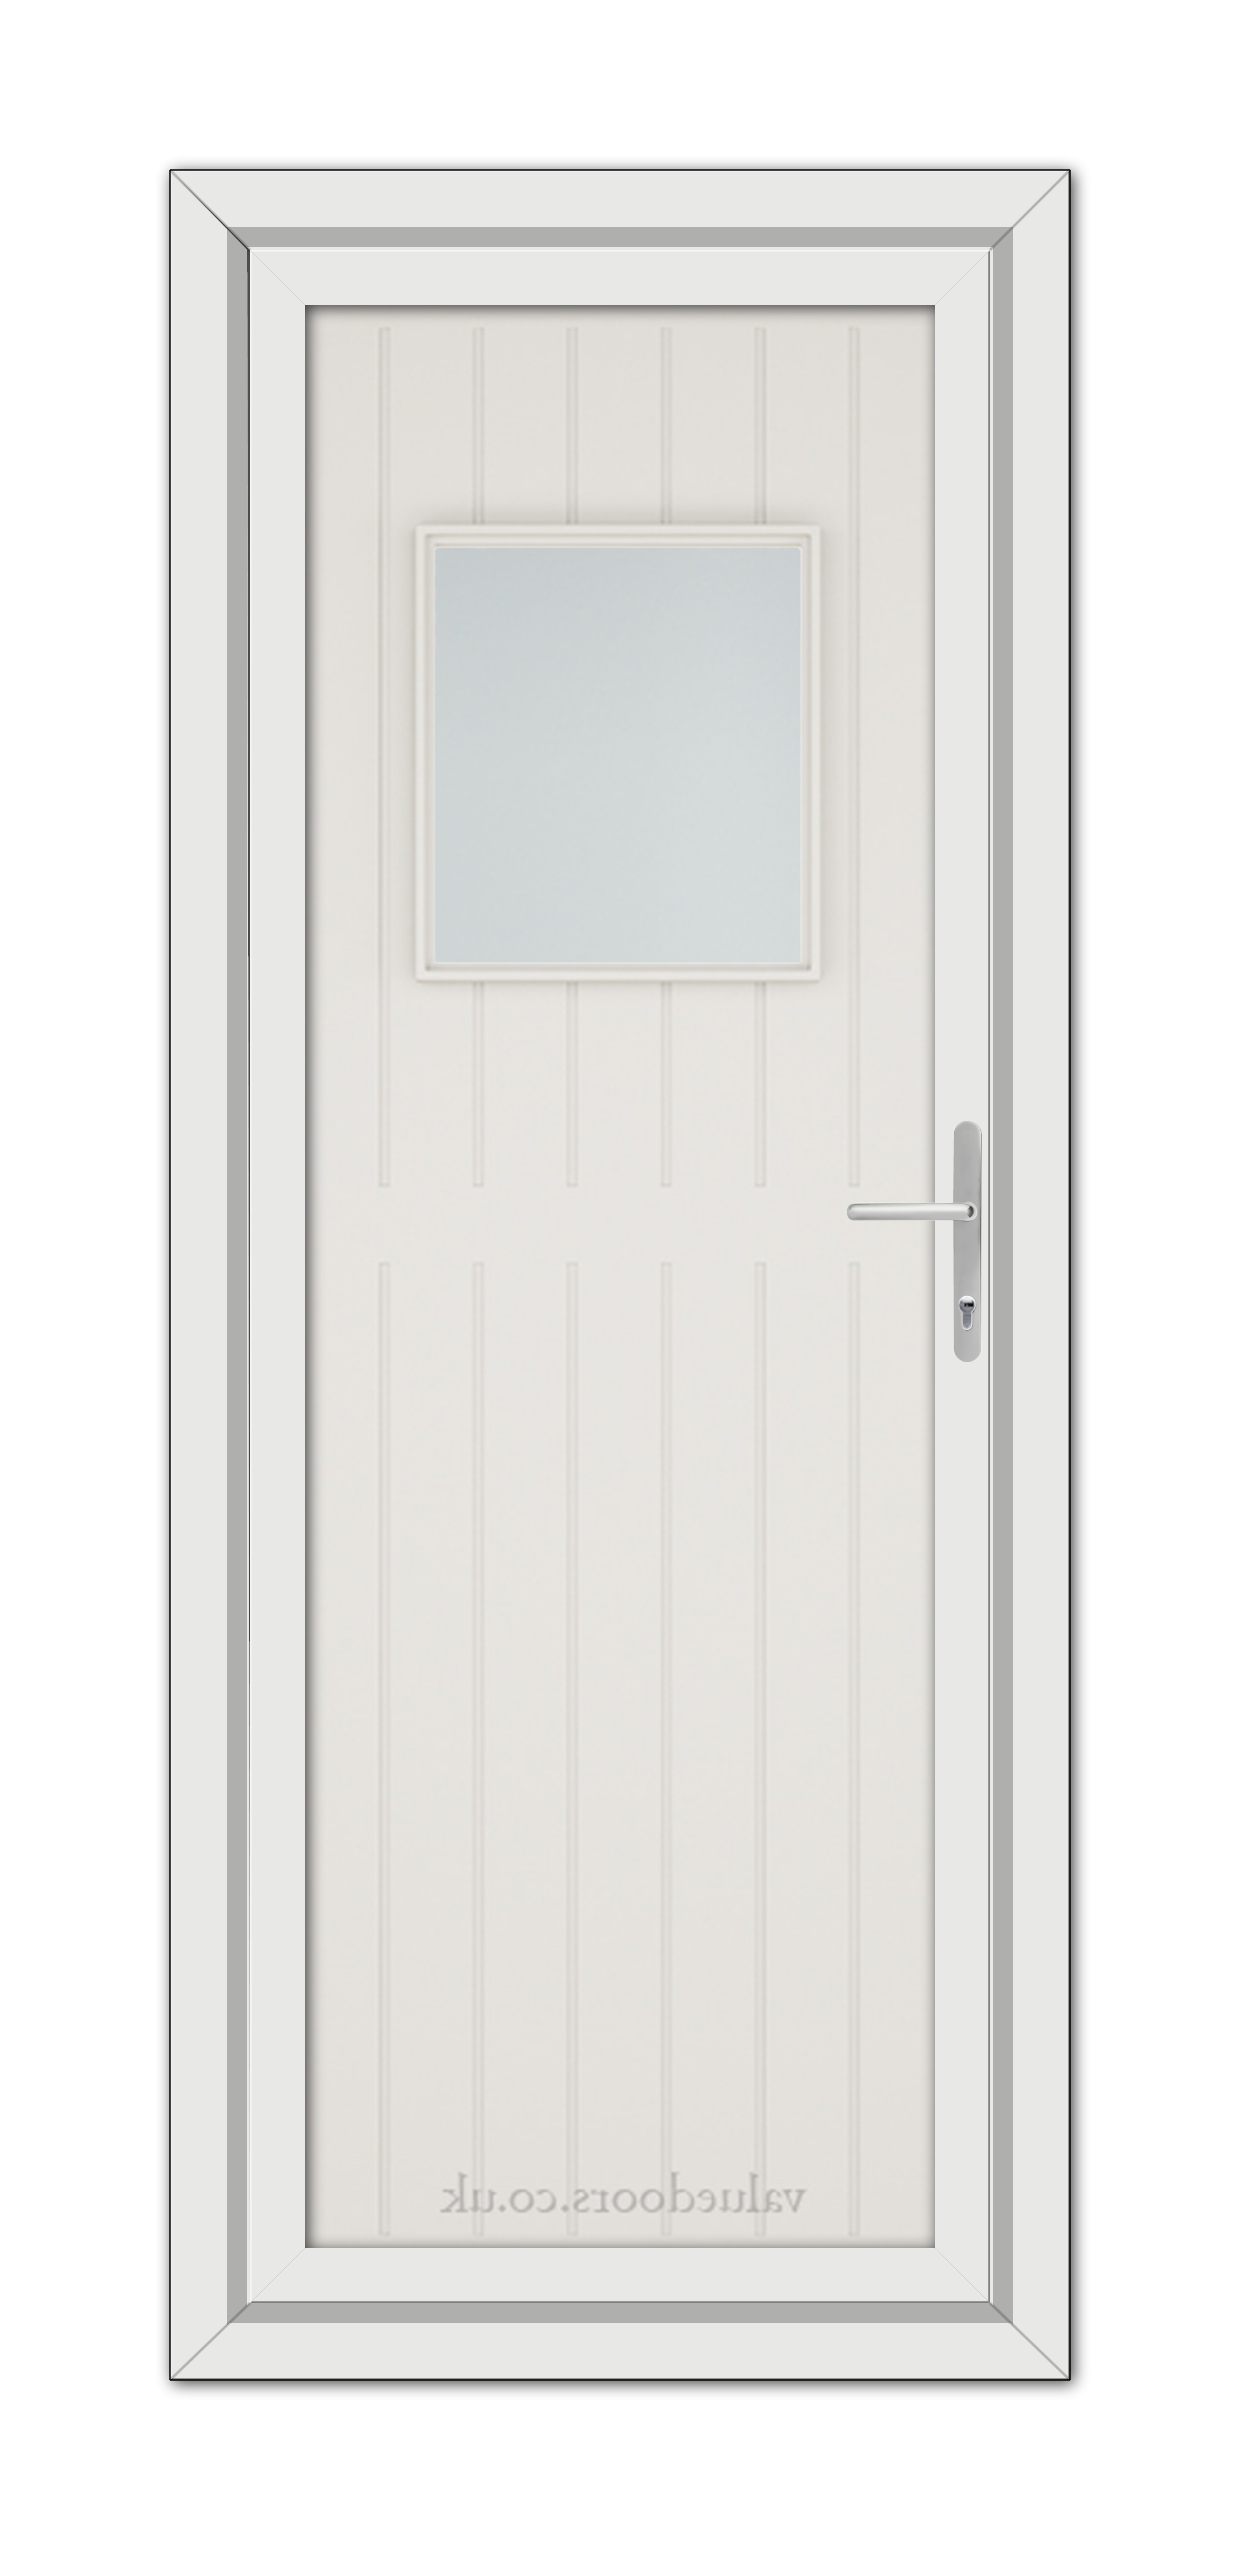 A White Cream Chatsworth uPVC Door with a square window.